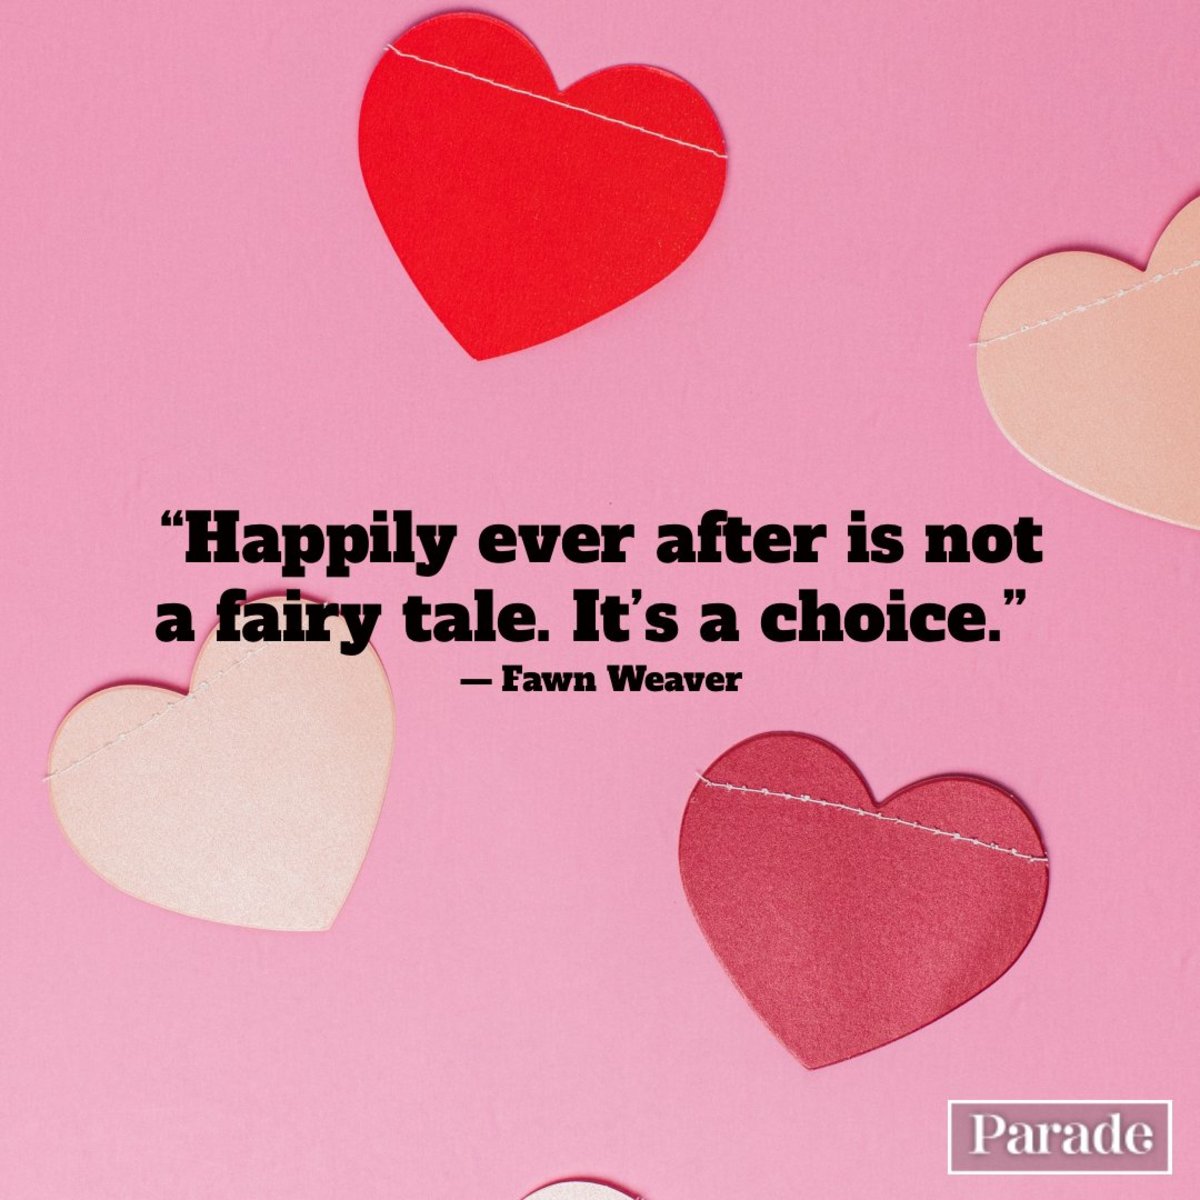 8 Squeeze Quotes About Love